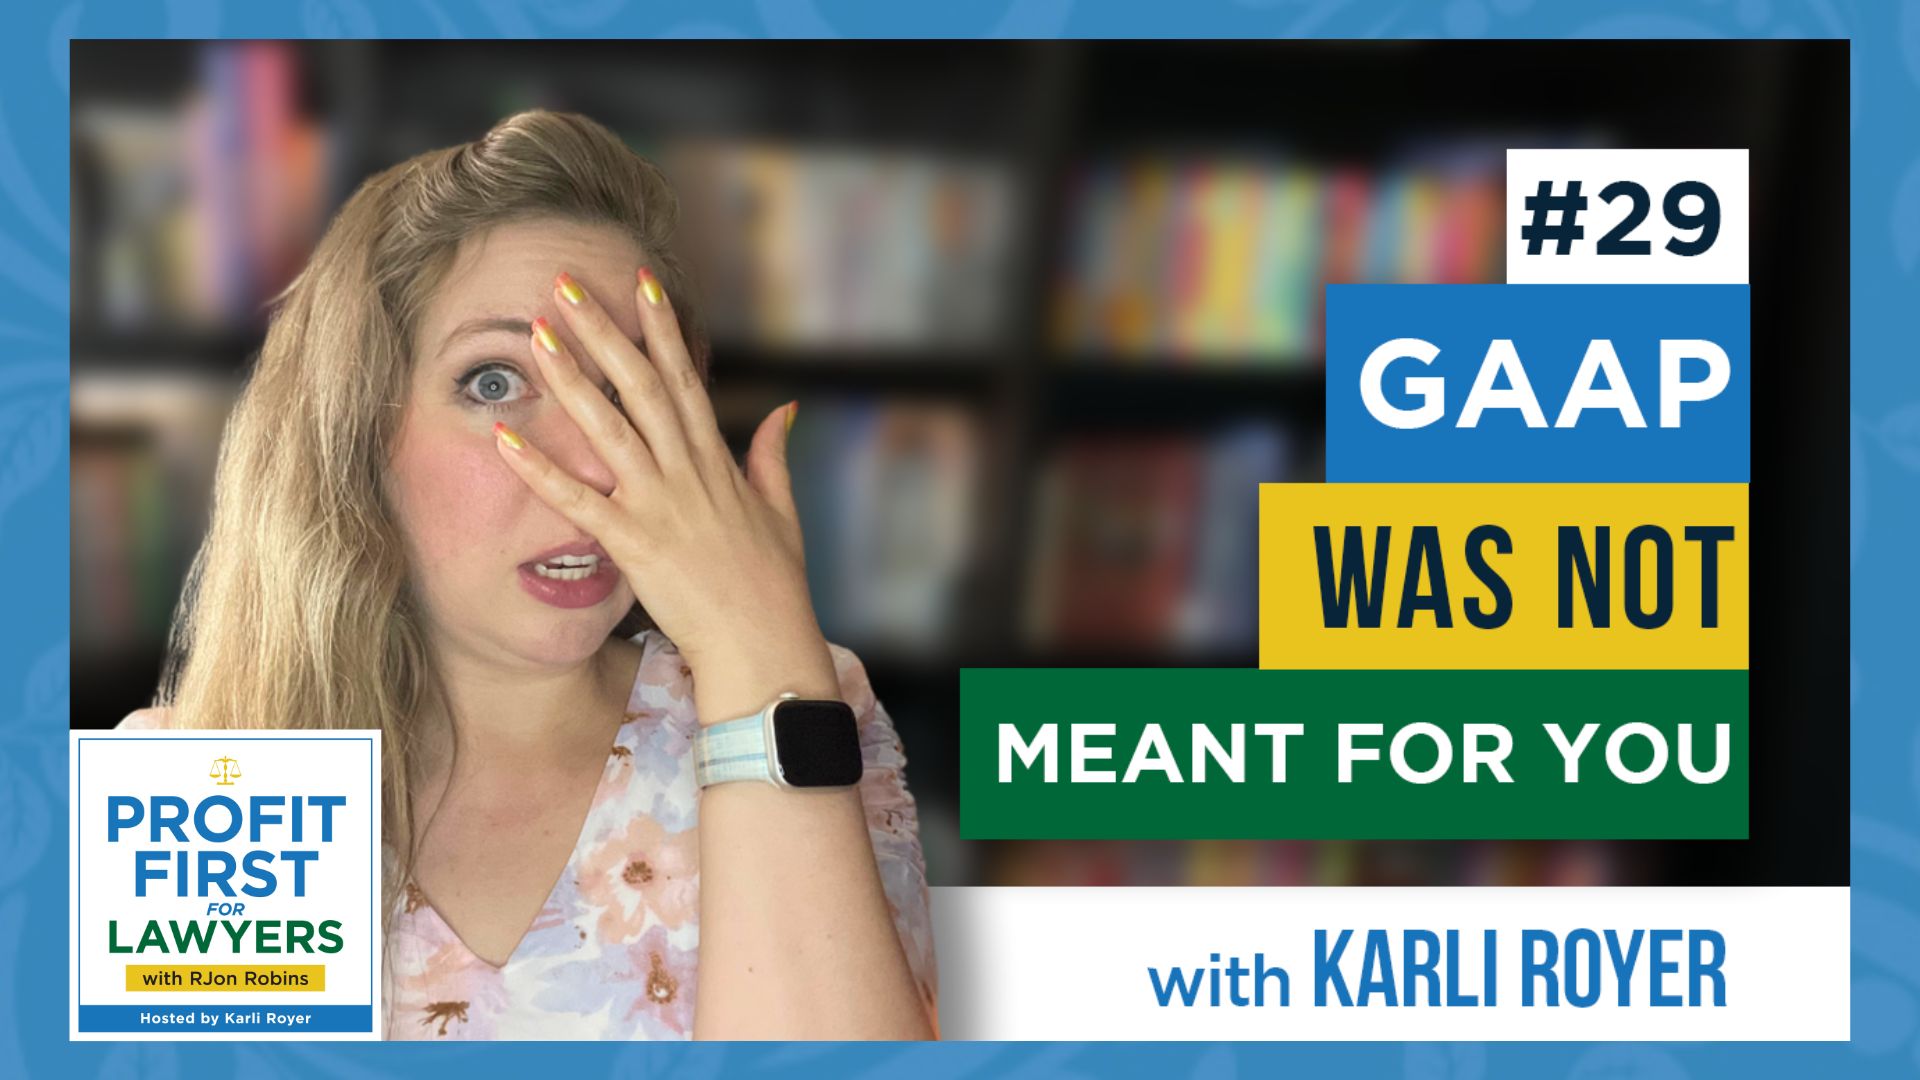 Profit First For Lawyers podcast episode 29 featured image with Karli Royer. Title of episode: GAAP Was Not Meant For You. Image of Karli shows her looking dismayed with her hand covering most of her face, with one of her eyes peeking through her fingers.